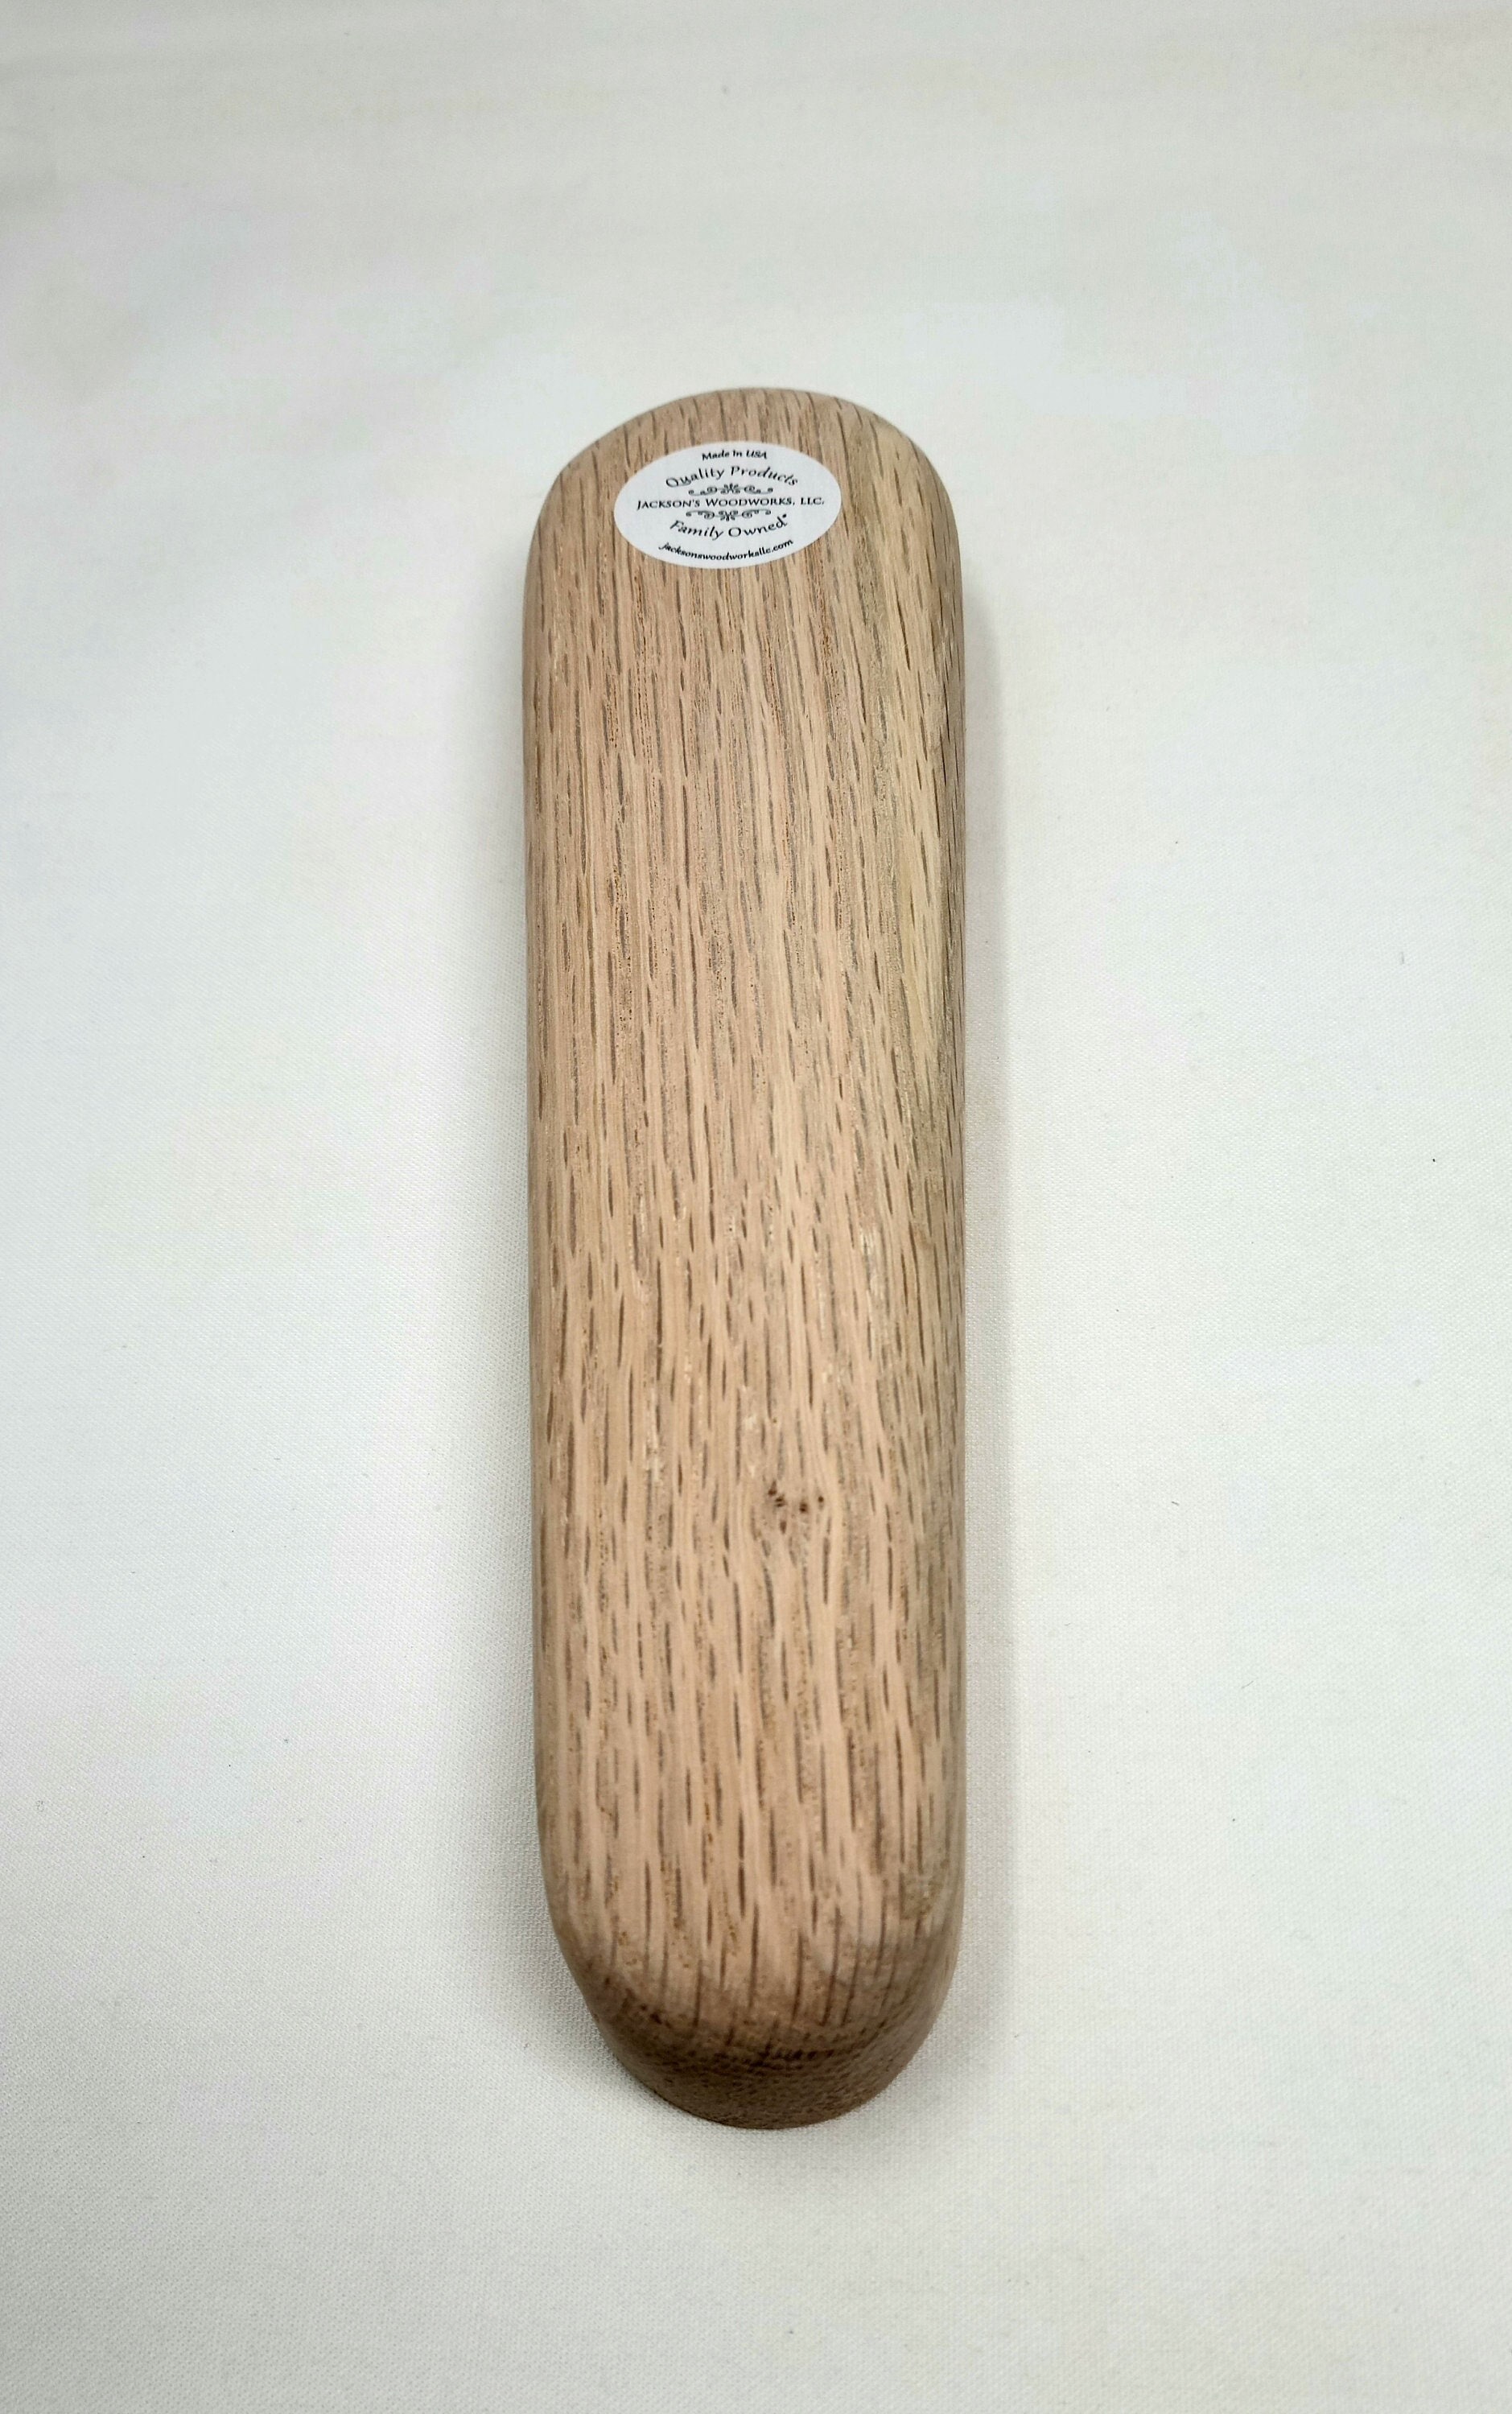 Tailors Clapper For Ironing Wooden Clapper Pressing Block In